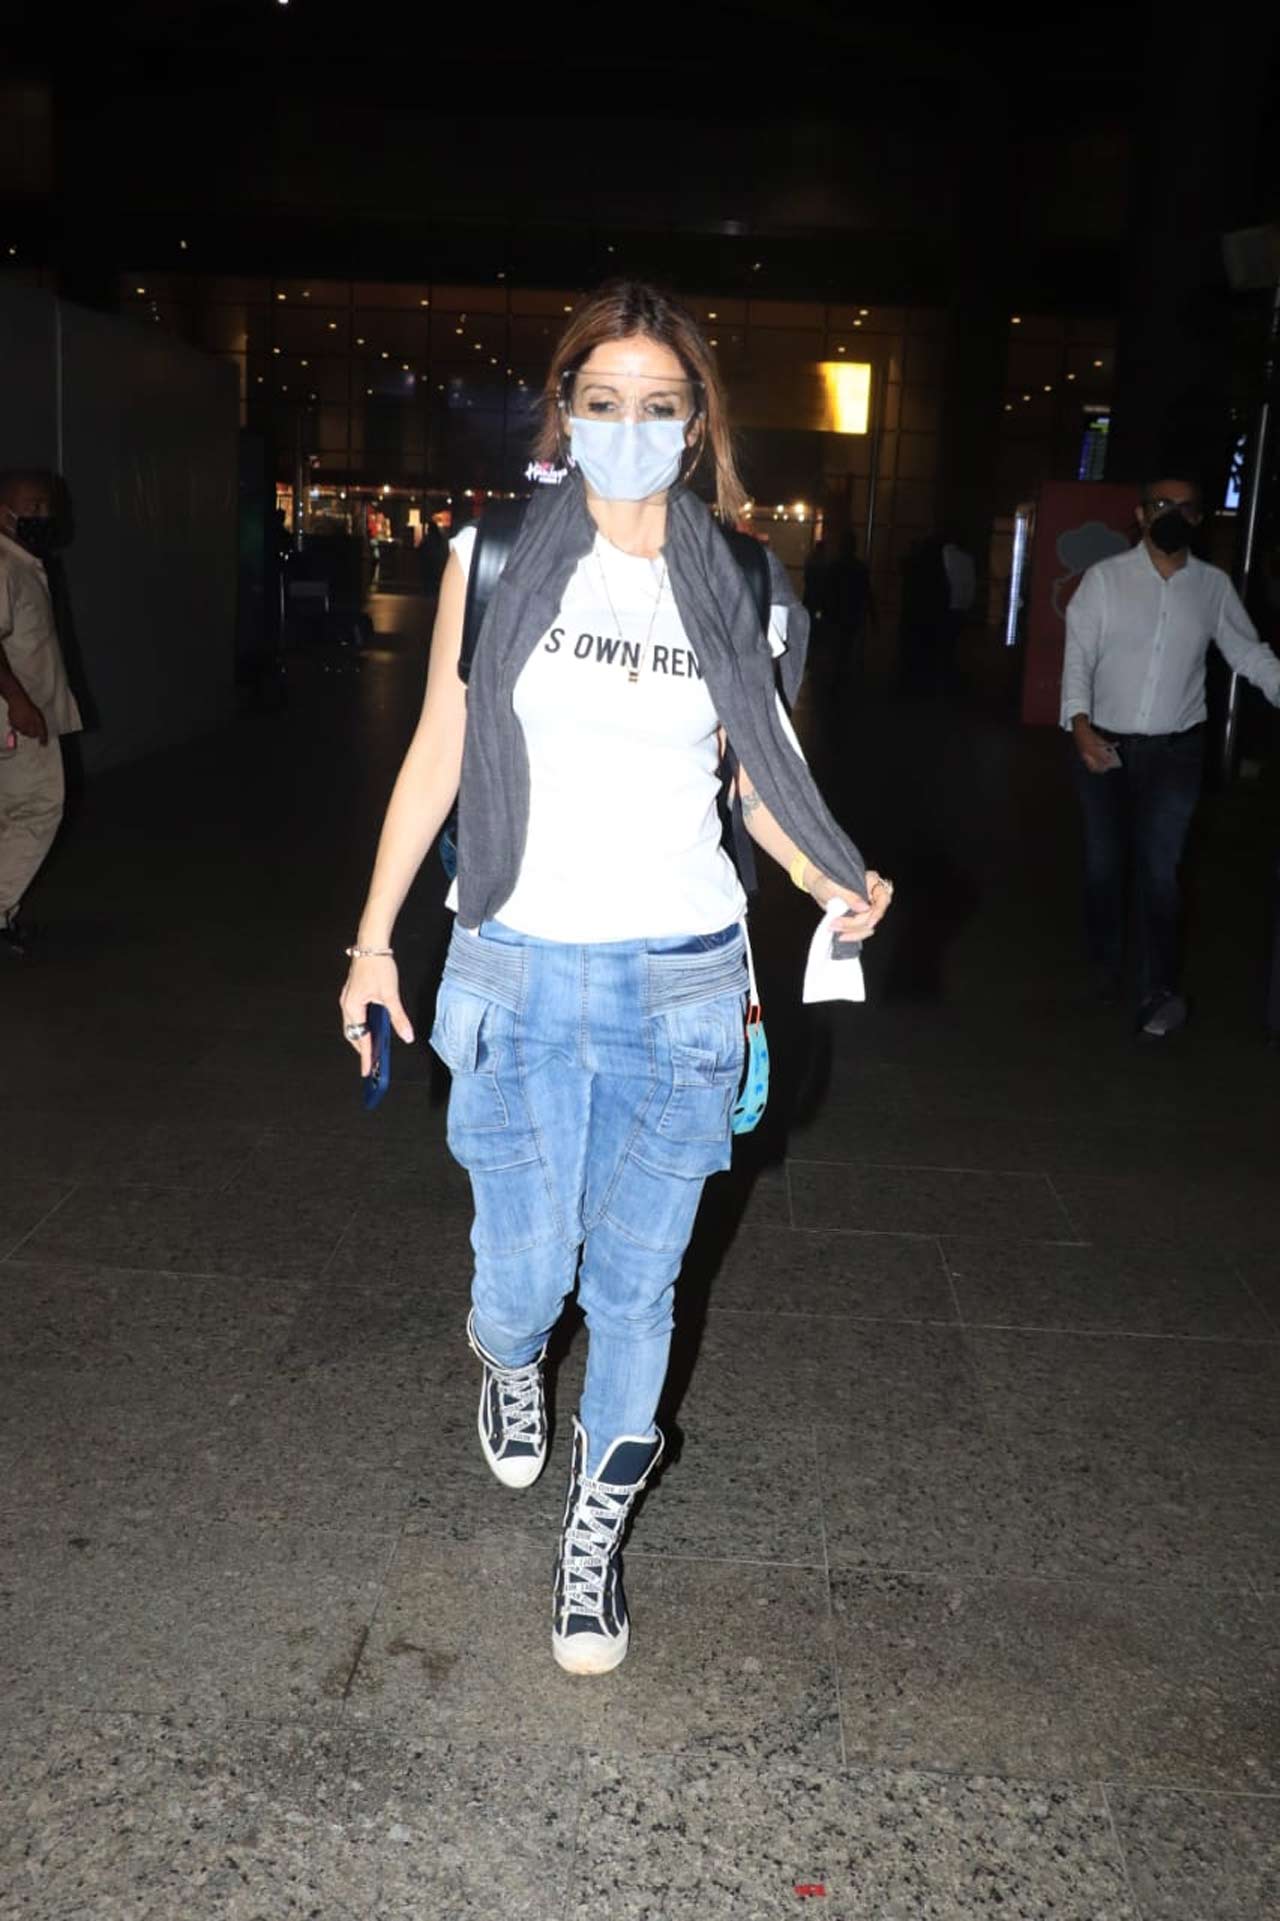 Sussanne Khan was also papped at the Mumbai airport by the shutterbugs.